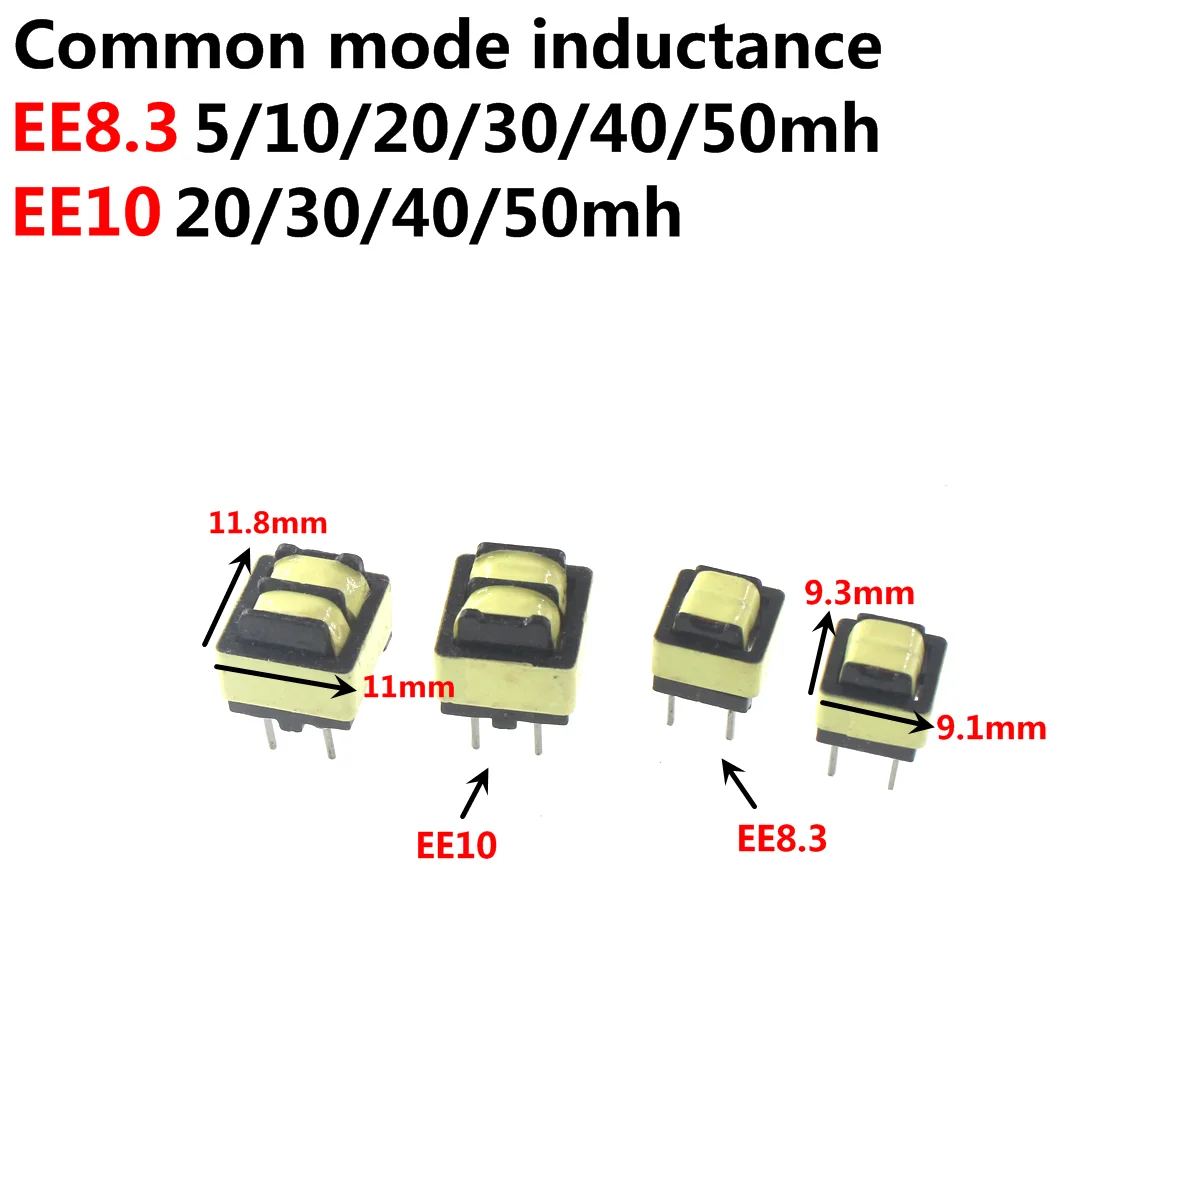 20pcs Common Mode Inductance EE8.3 EE10 EE12 10MH 20MH 30MH 40MH 50MH 60MH 100MH LED Power Filter Inductor Coil Transformer 5pcs 3d inductance antenna 722j automobile pke low frequency receiver inductor peps entry inductance coil for car smart key